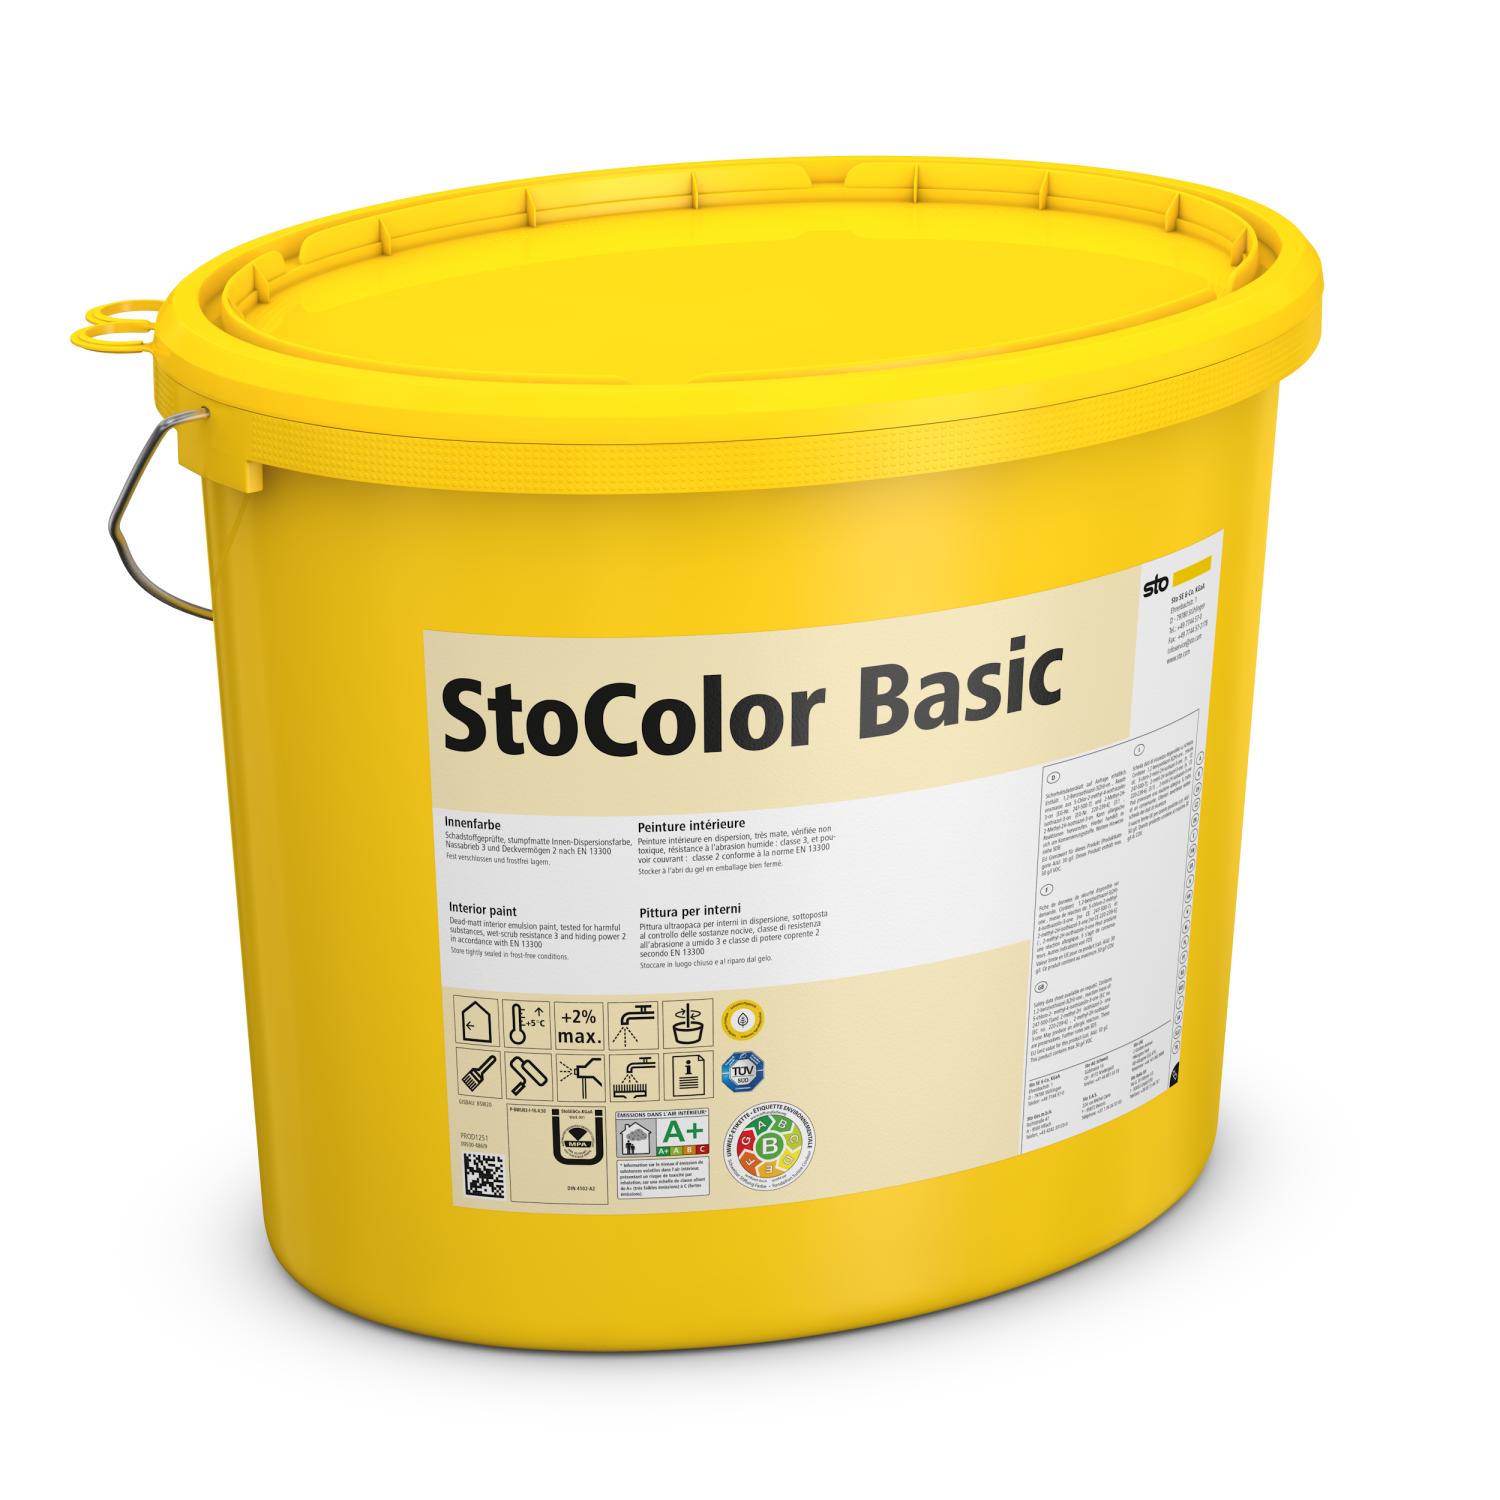 StoColor Basic